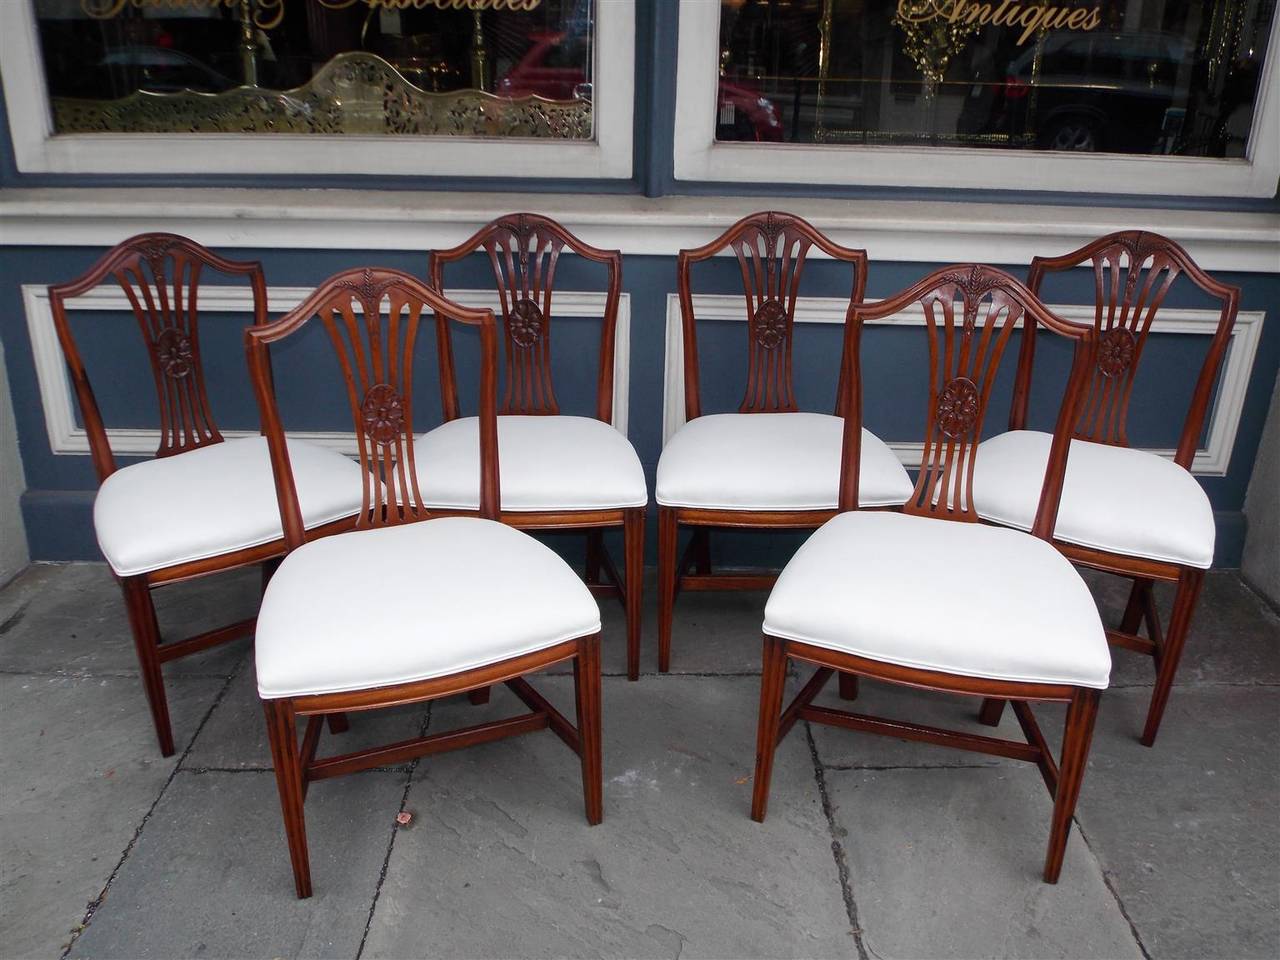 Set of Six American Hepplewhite mahogany period side chairs with carved splat backs consisting of wheat sheaths and centered floral oval medallions, seat bottoms are upholstered in white muslin with horse hair and cotton padding, original cross